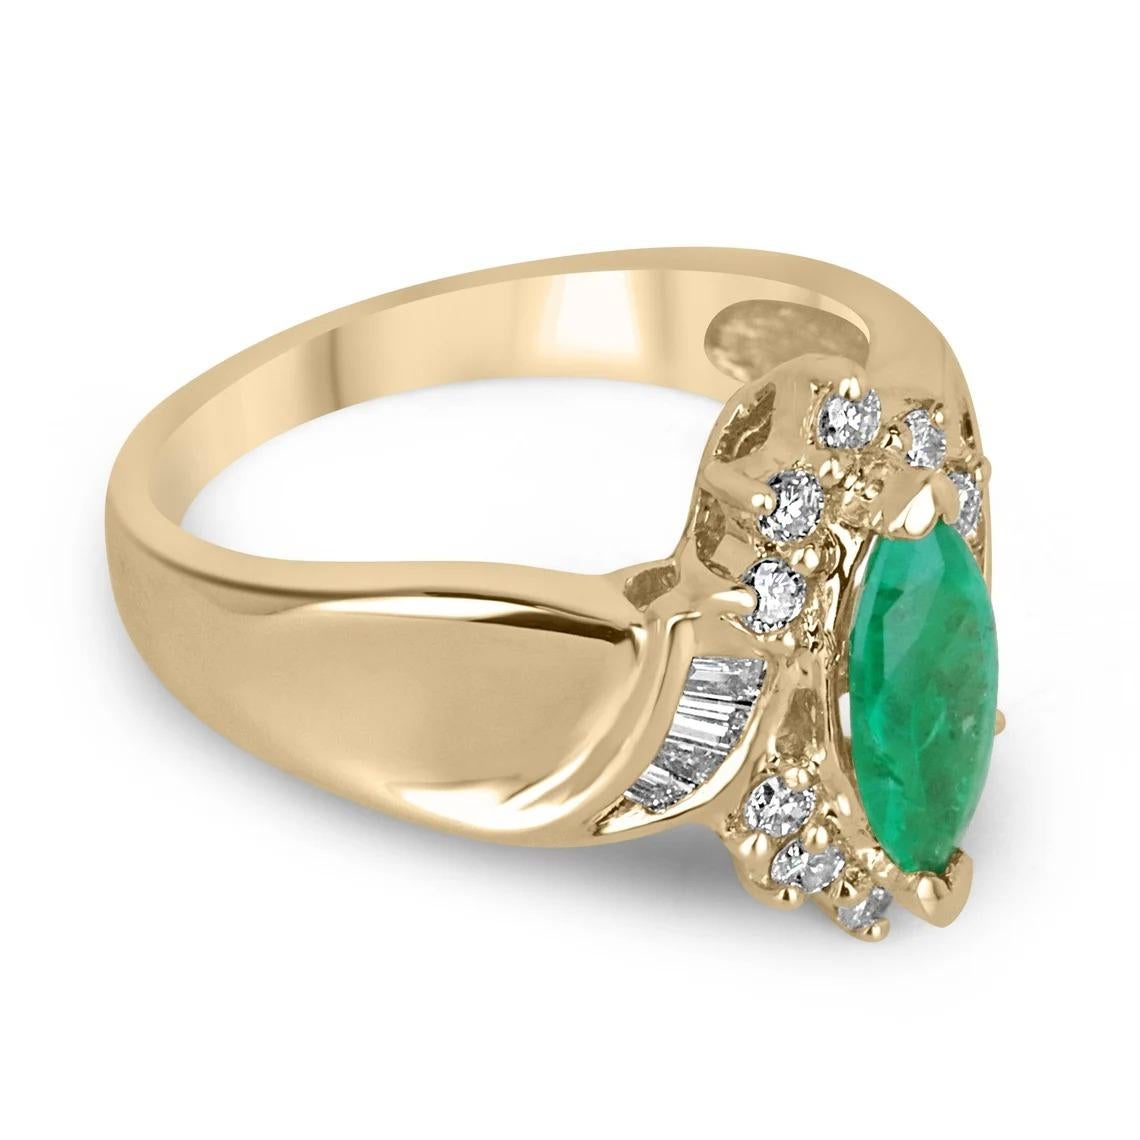 What makes more of a statement than this natural emerald and diamond ring? The center stone features a gorgeous marquise cut Colombian emerald that displays a vivacious medium yellowish-green color with excellent-very good clarity and luster. Set in